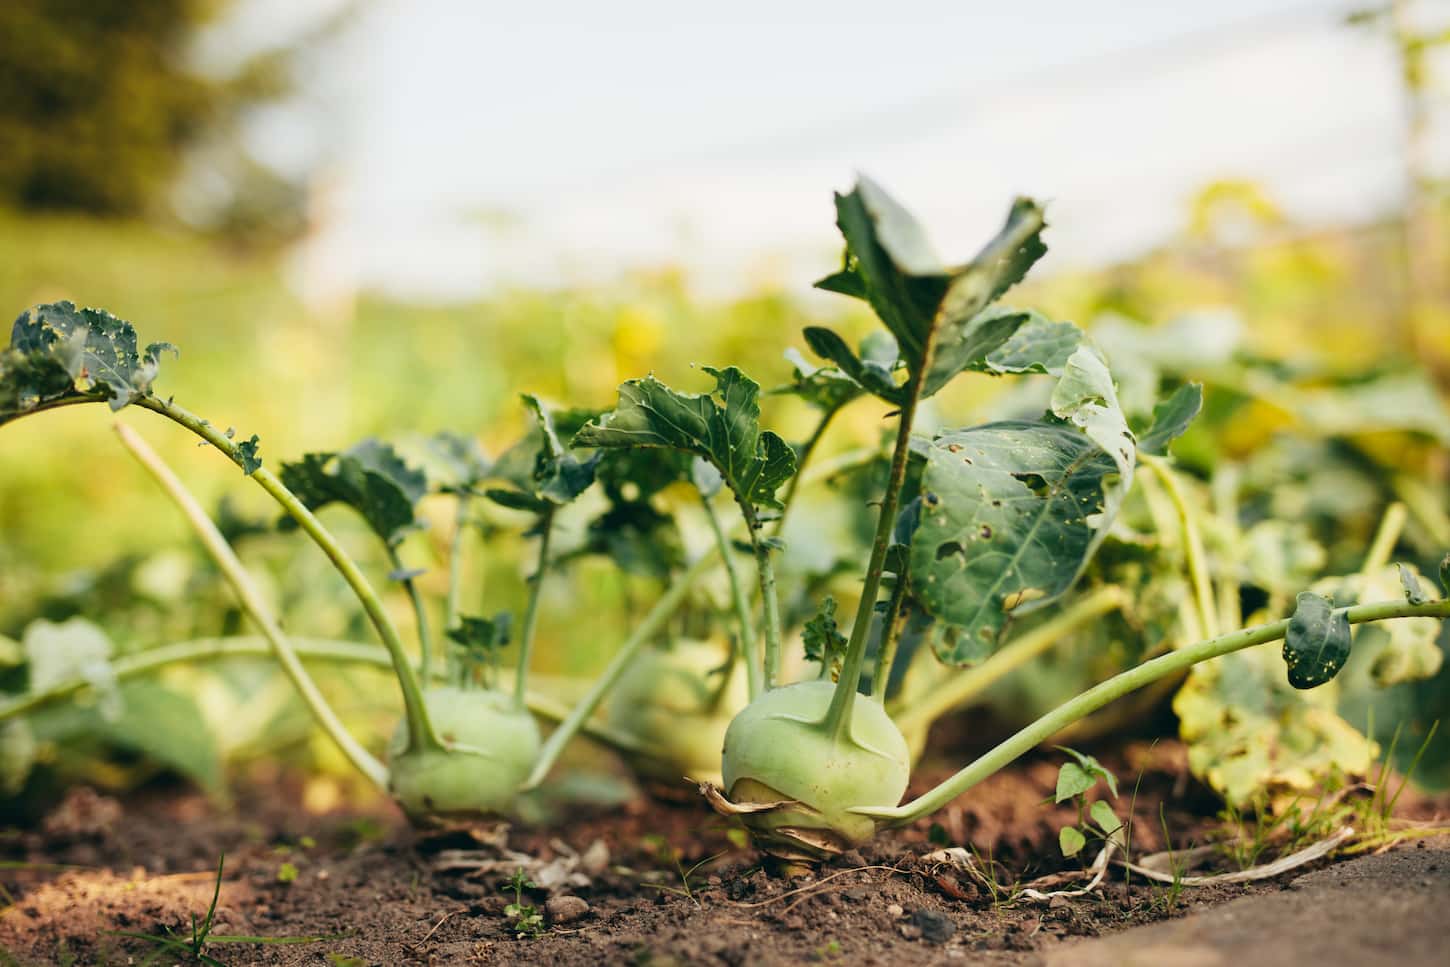 An image of organic kohlrabi growing in the garden also called cabbage turnip.